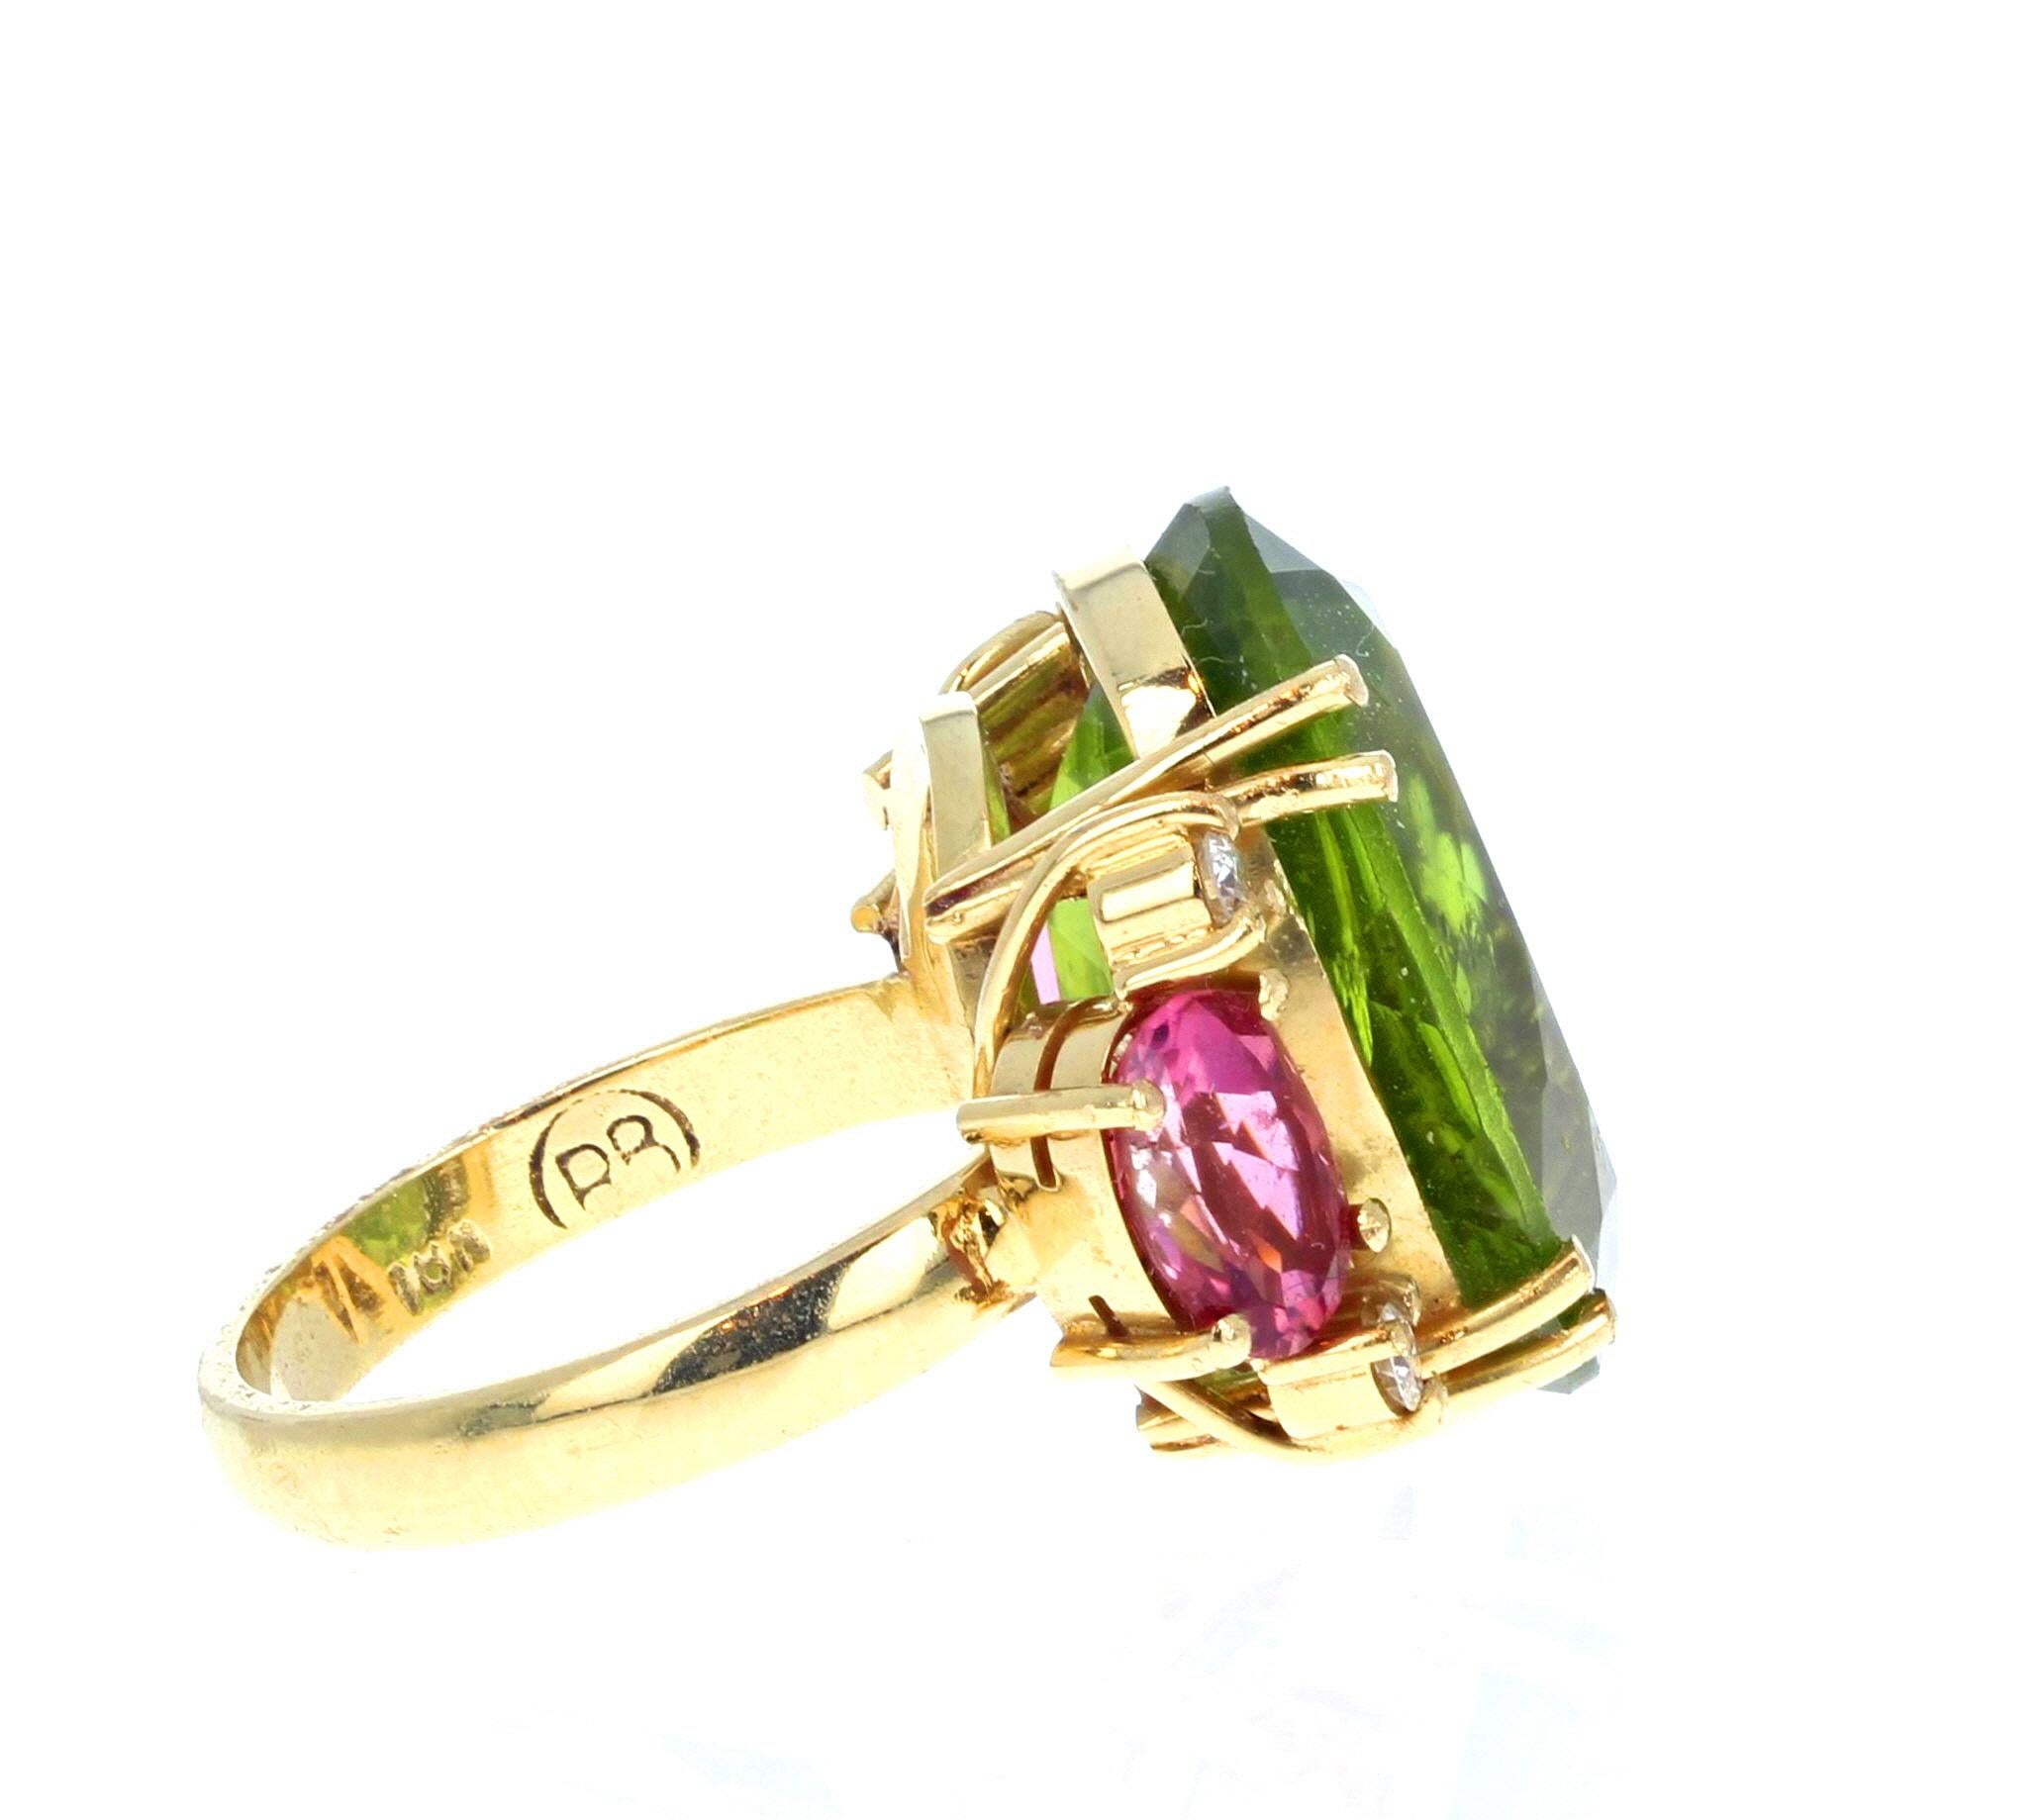 AJD Magnificent Brilliant 14 Ct Green&Pink Tourmalines, Diamonds 18Kt Gold Ring For Sale 1